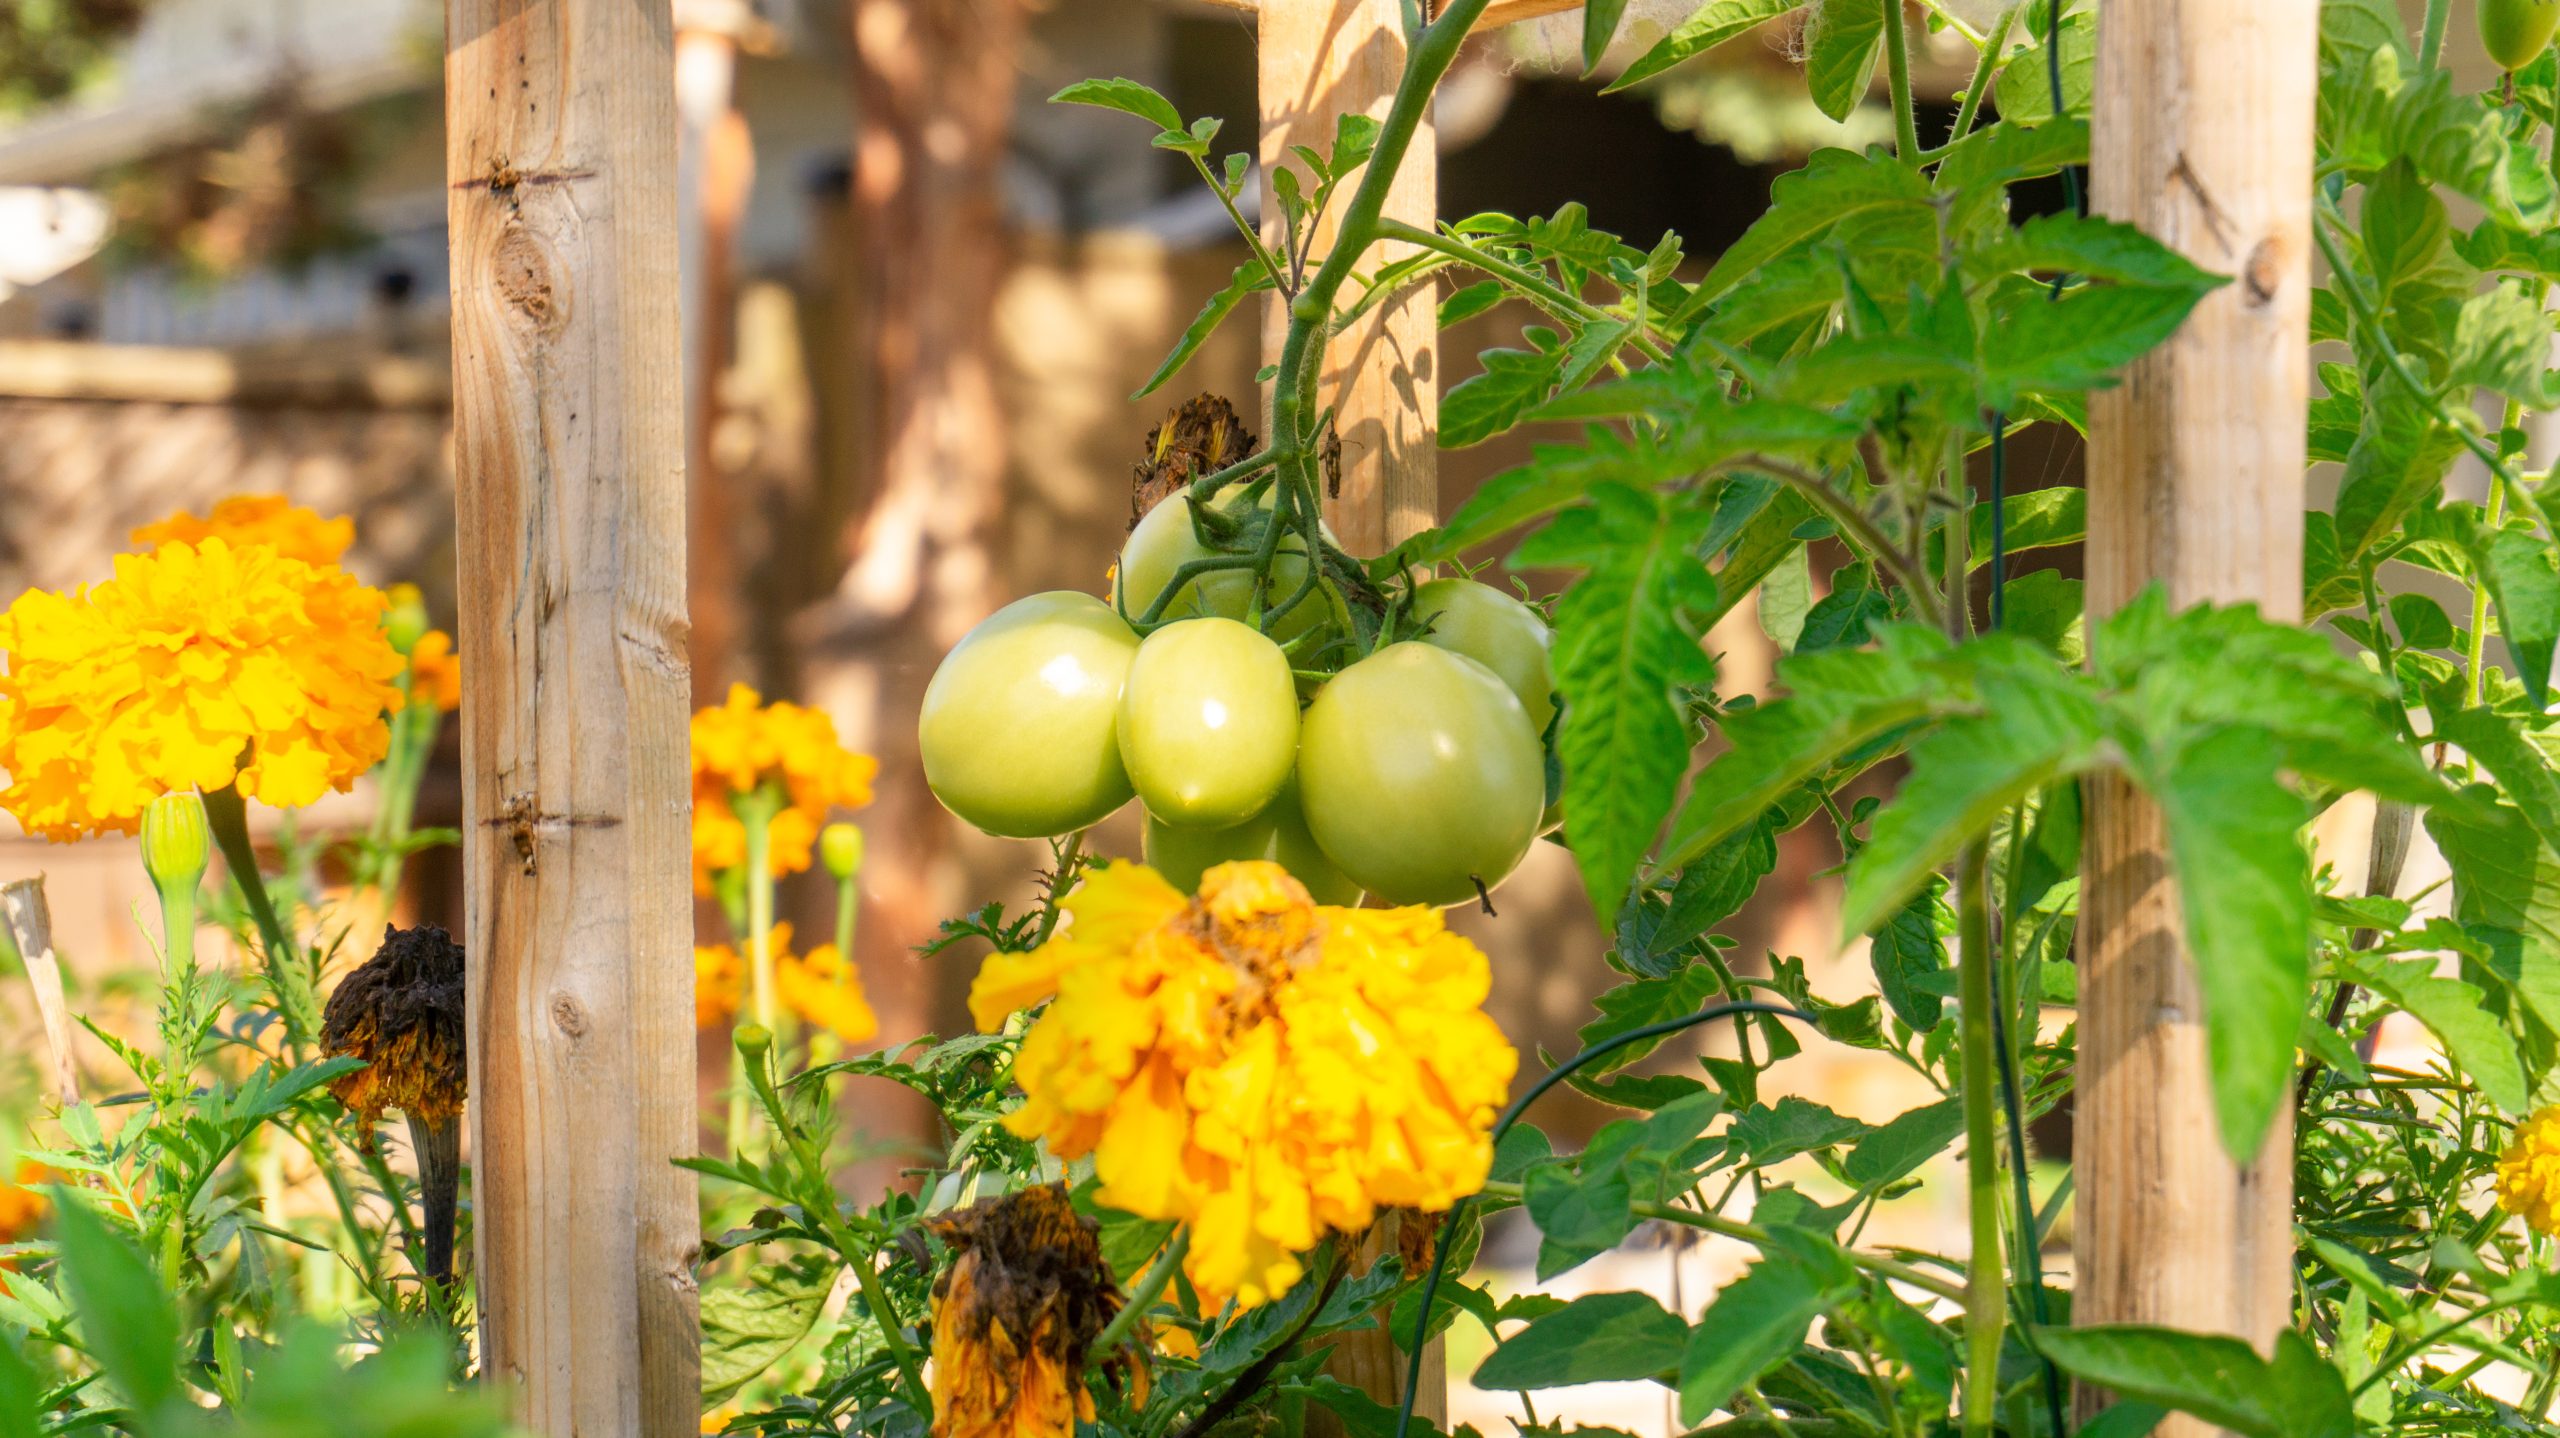 Companion Planting: Learn which plants grow well together and which pairings you should avoid